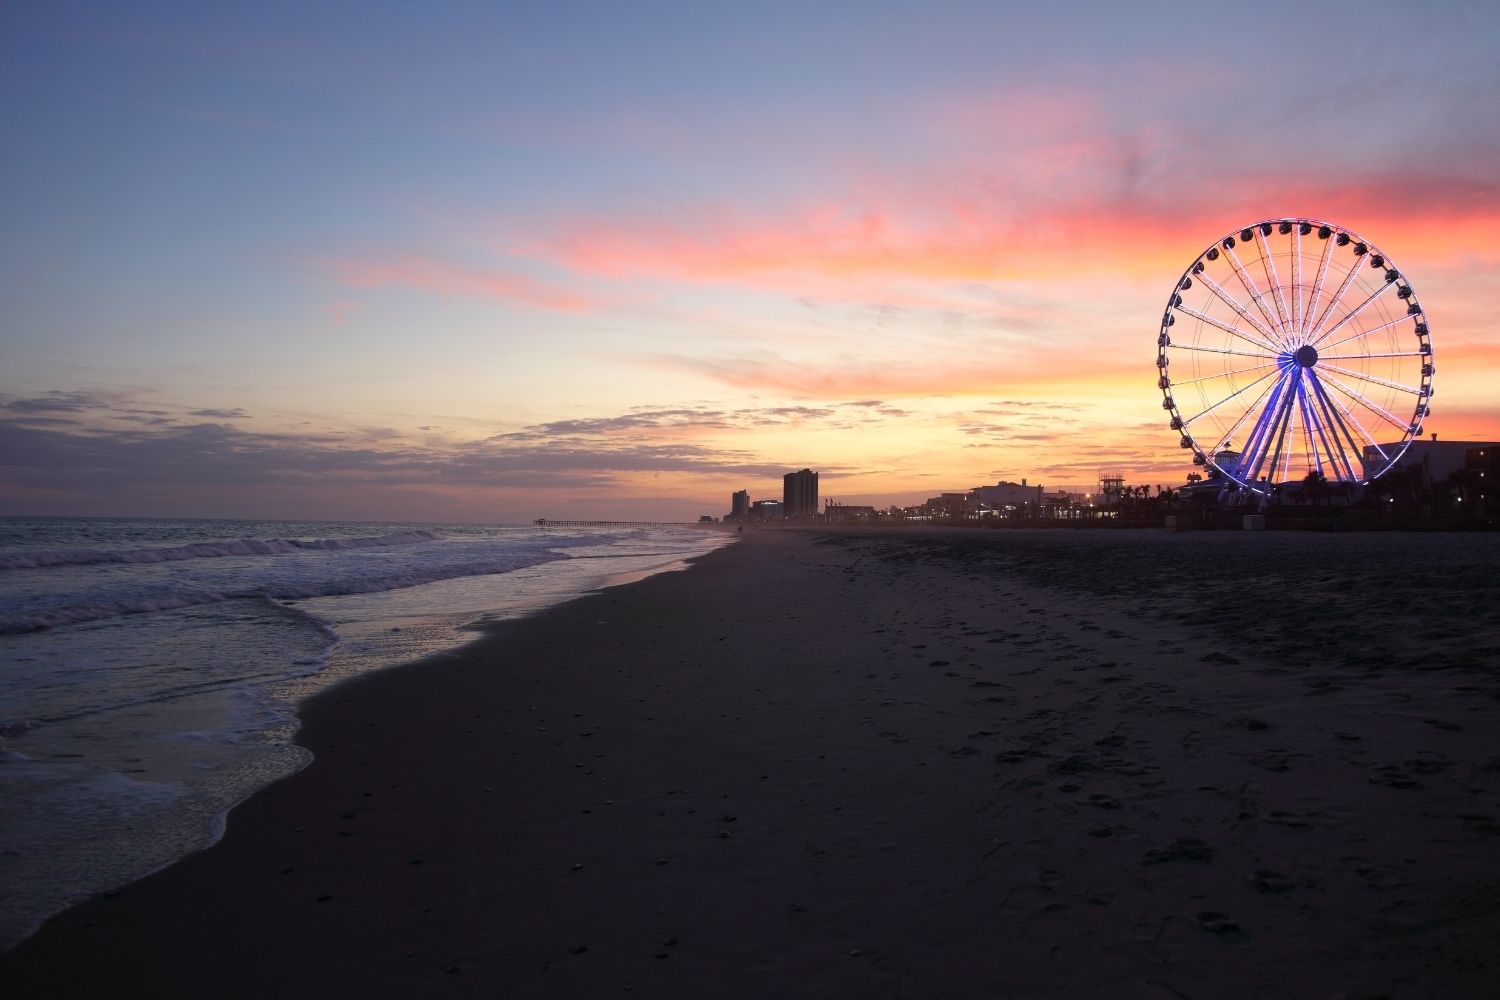 Best Things to do in Myrtle Beach